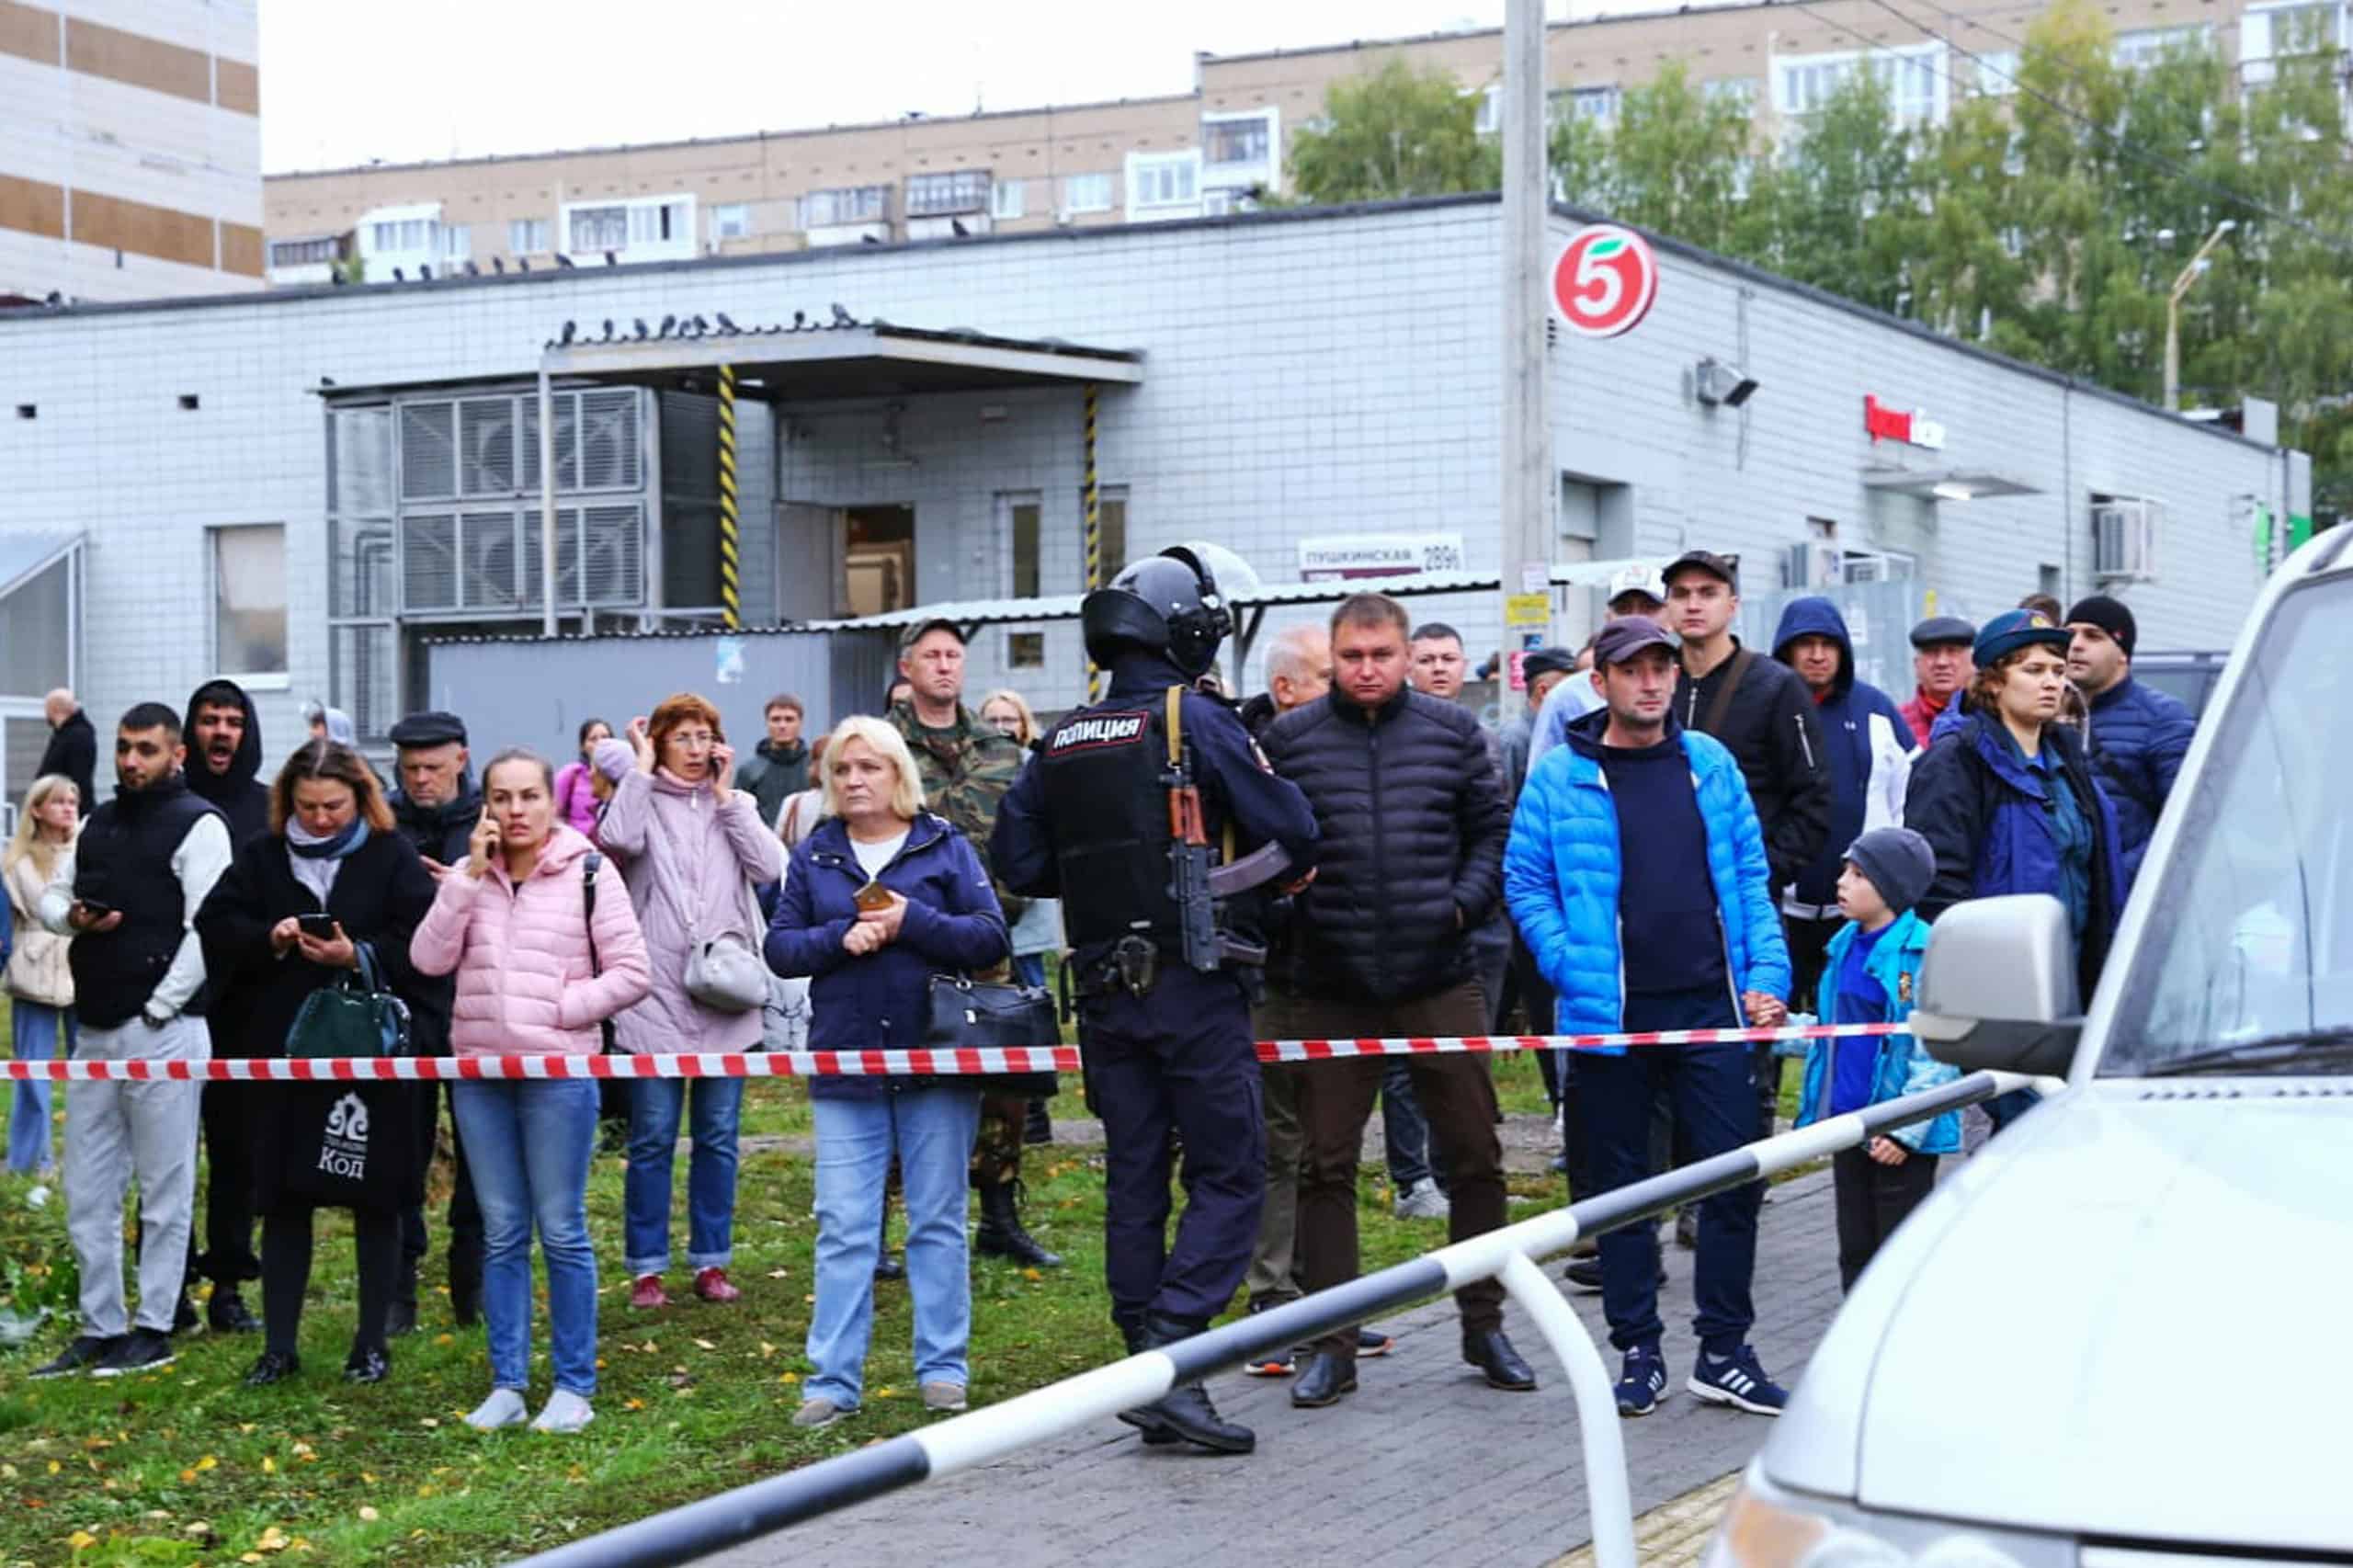 Russia School Shooting: At Least 13 Dead, 21 More Injured After Gunman Opens Fire